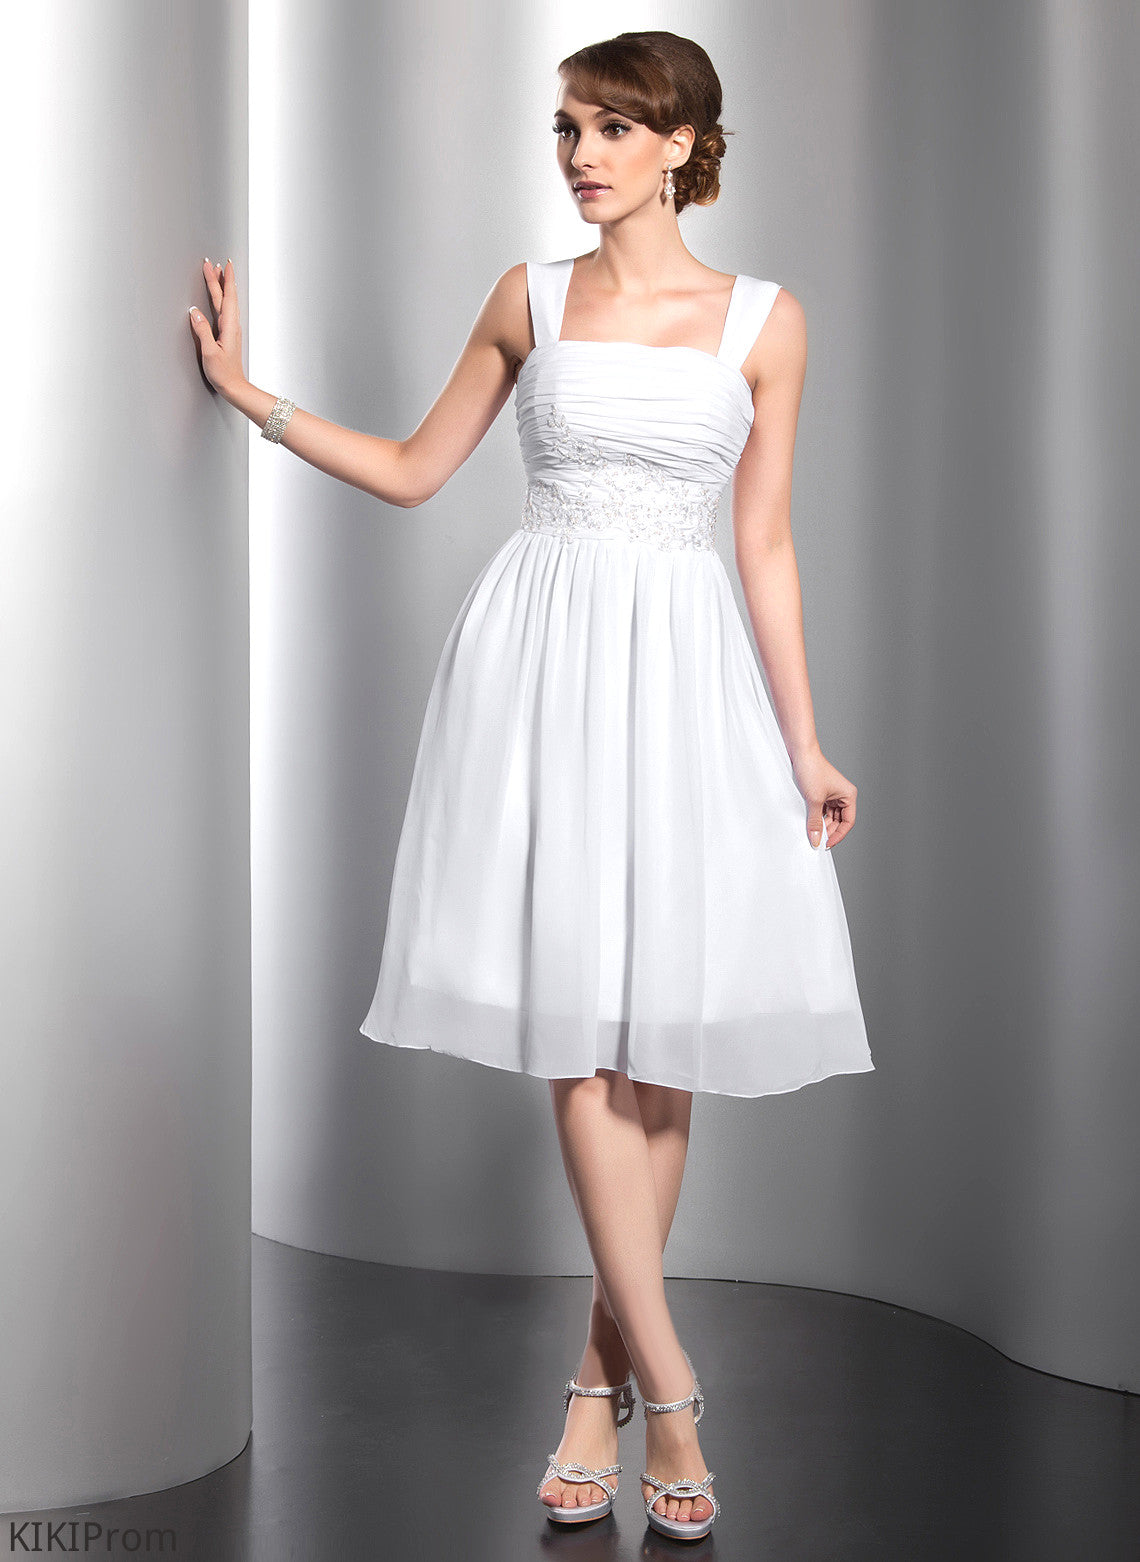 Jessie Homecoming Dresses Beading Dress Neckline Appliques Lace Square Chiffon A-Line Ruffle With Knee-Length Homecoming